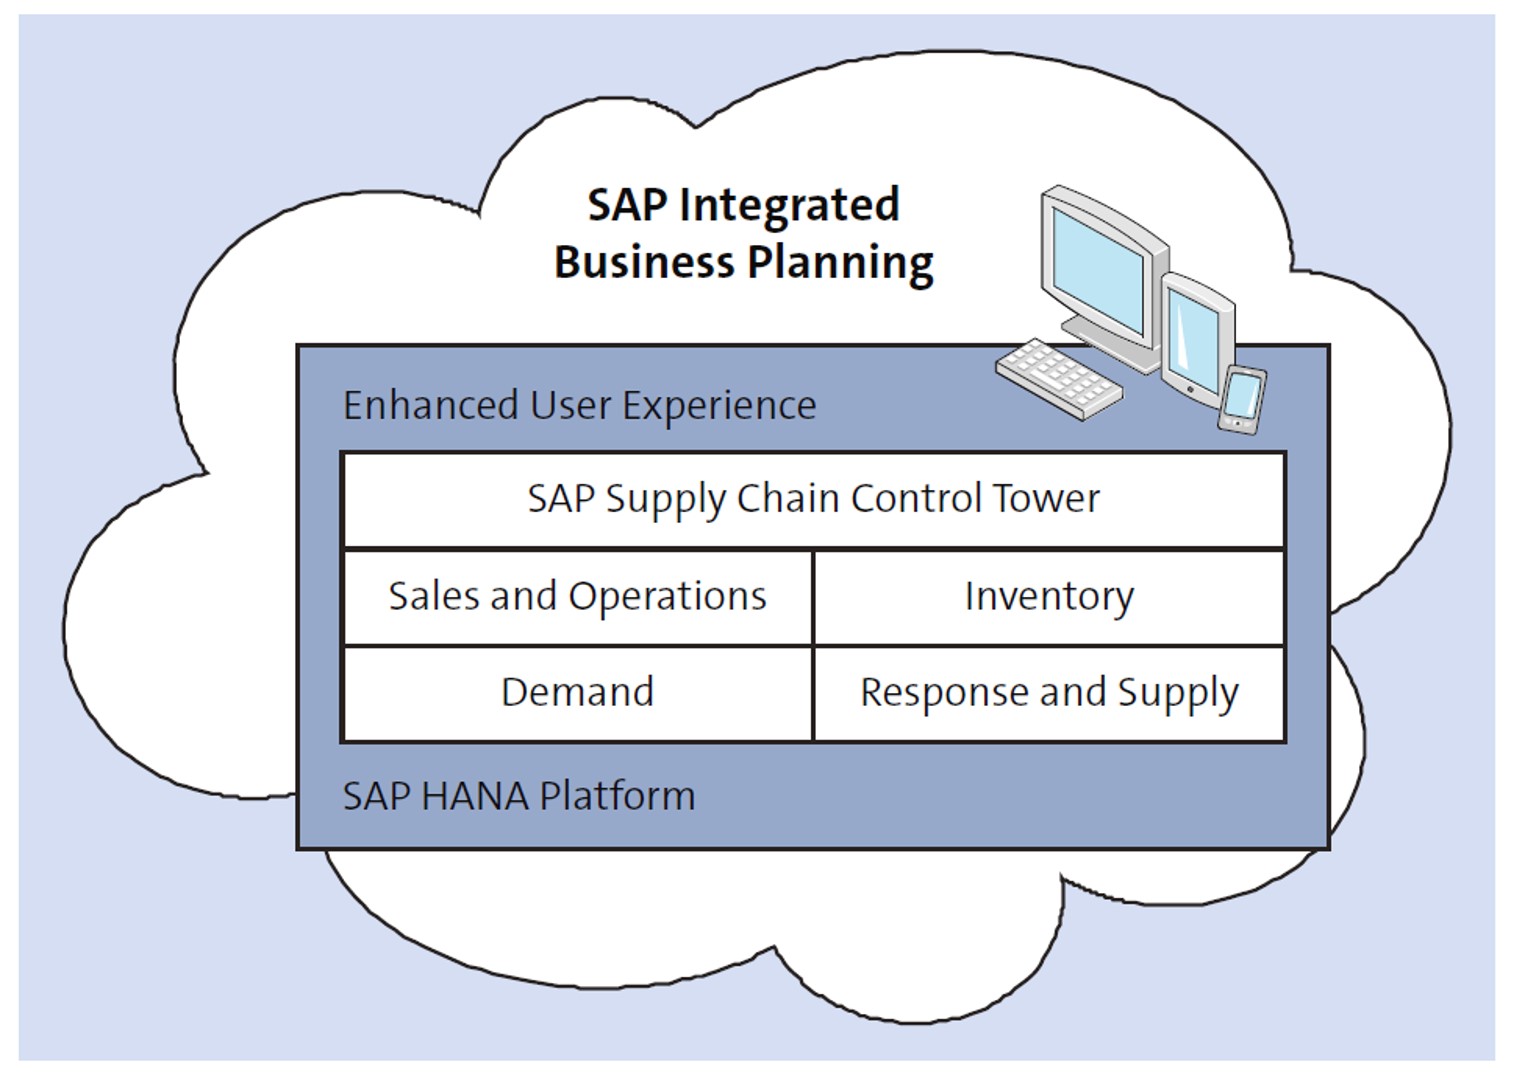 SAP Integrated Business Planning (SAP IBP) Overview